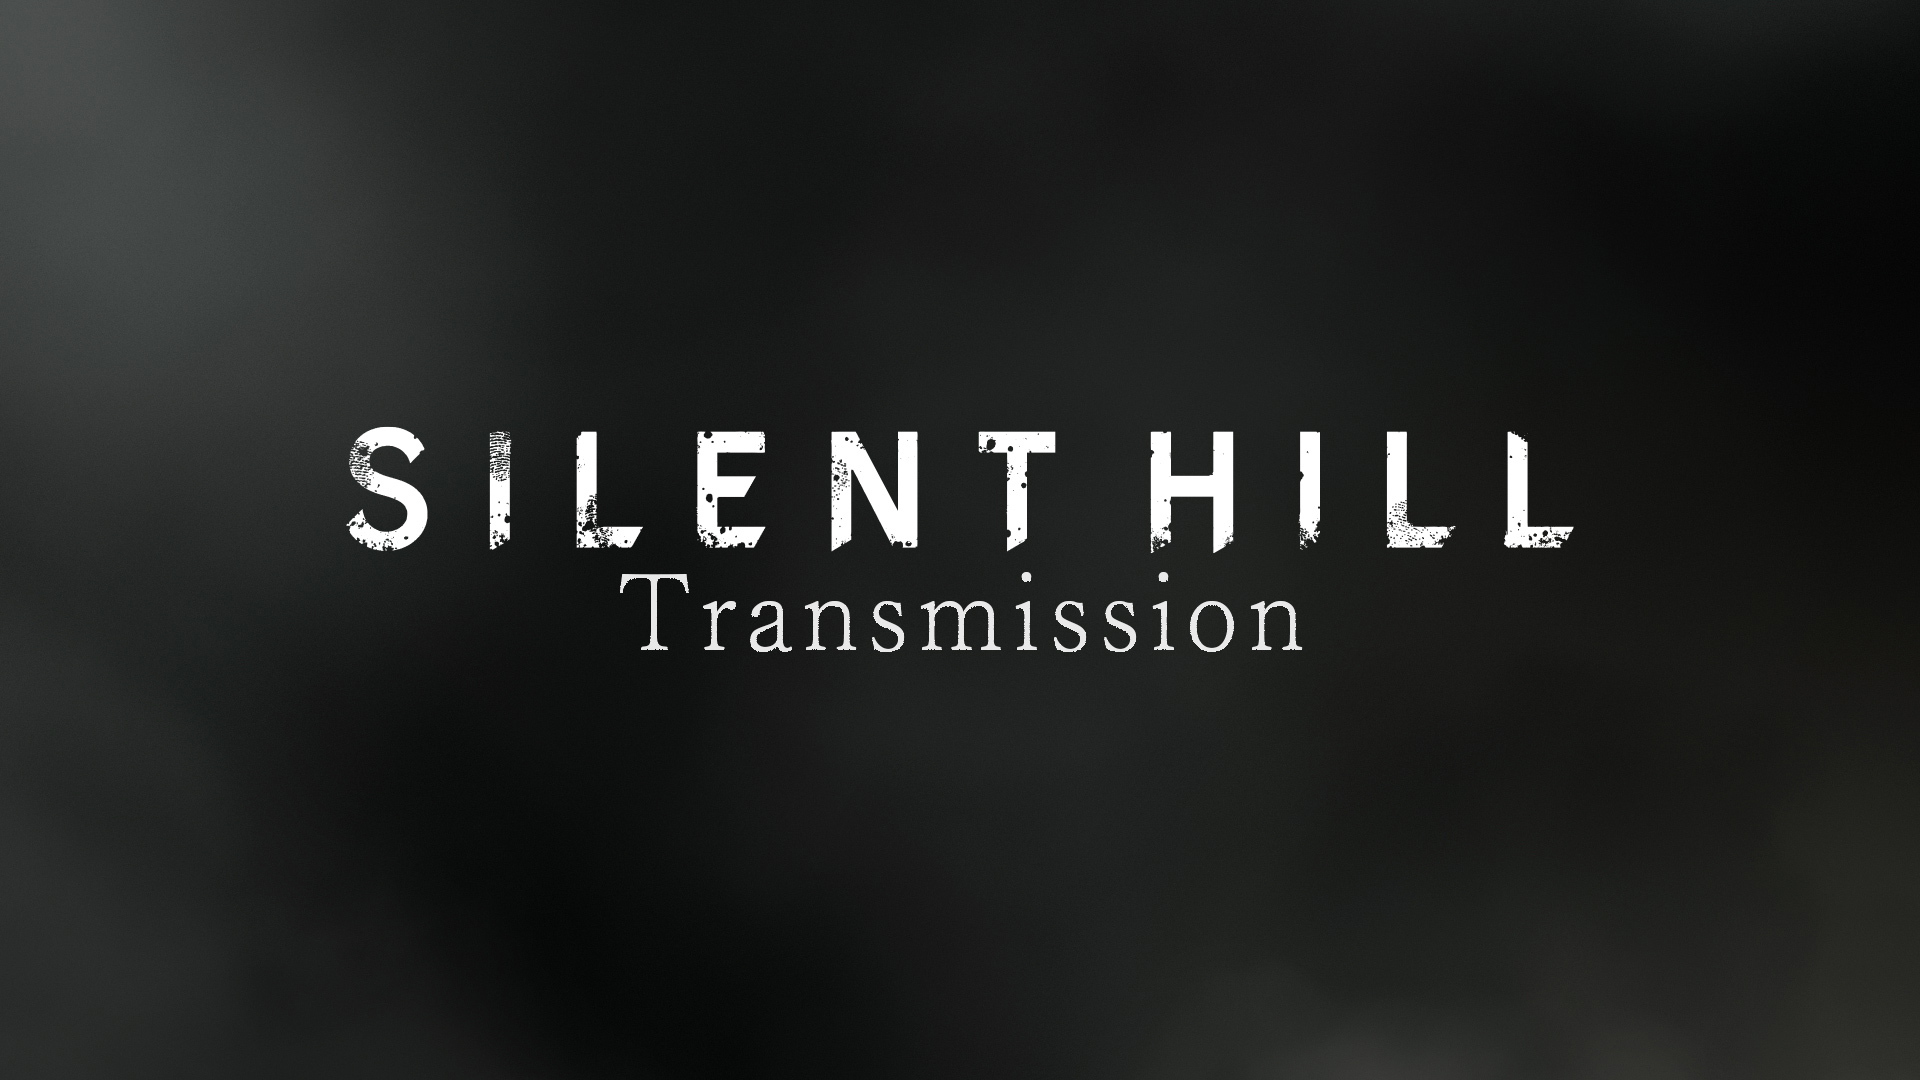 We'll finally get an update on the Silent Hill franchise later this week